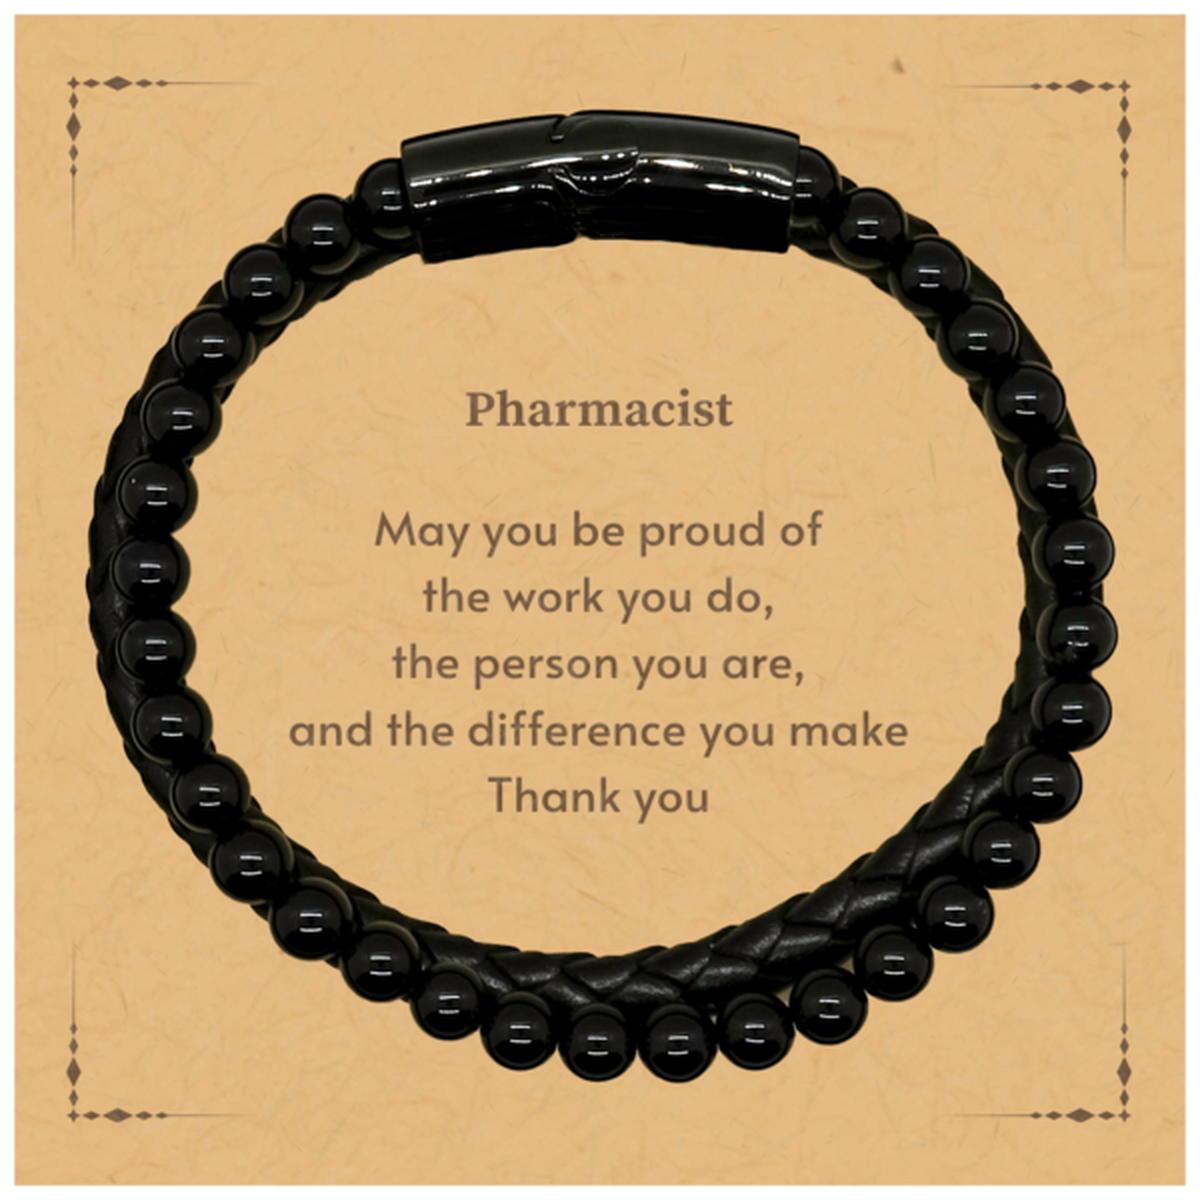 Heartwarming Stone Leather Bracelets Retirement Coworkers Gifts for Pharmacist, Pharmacist May You be proud of the work you do, the person you are Gifts for Boss Men Women Friends